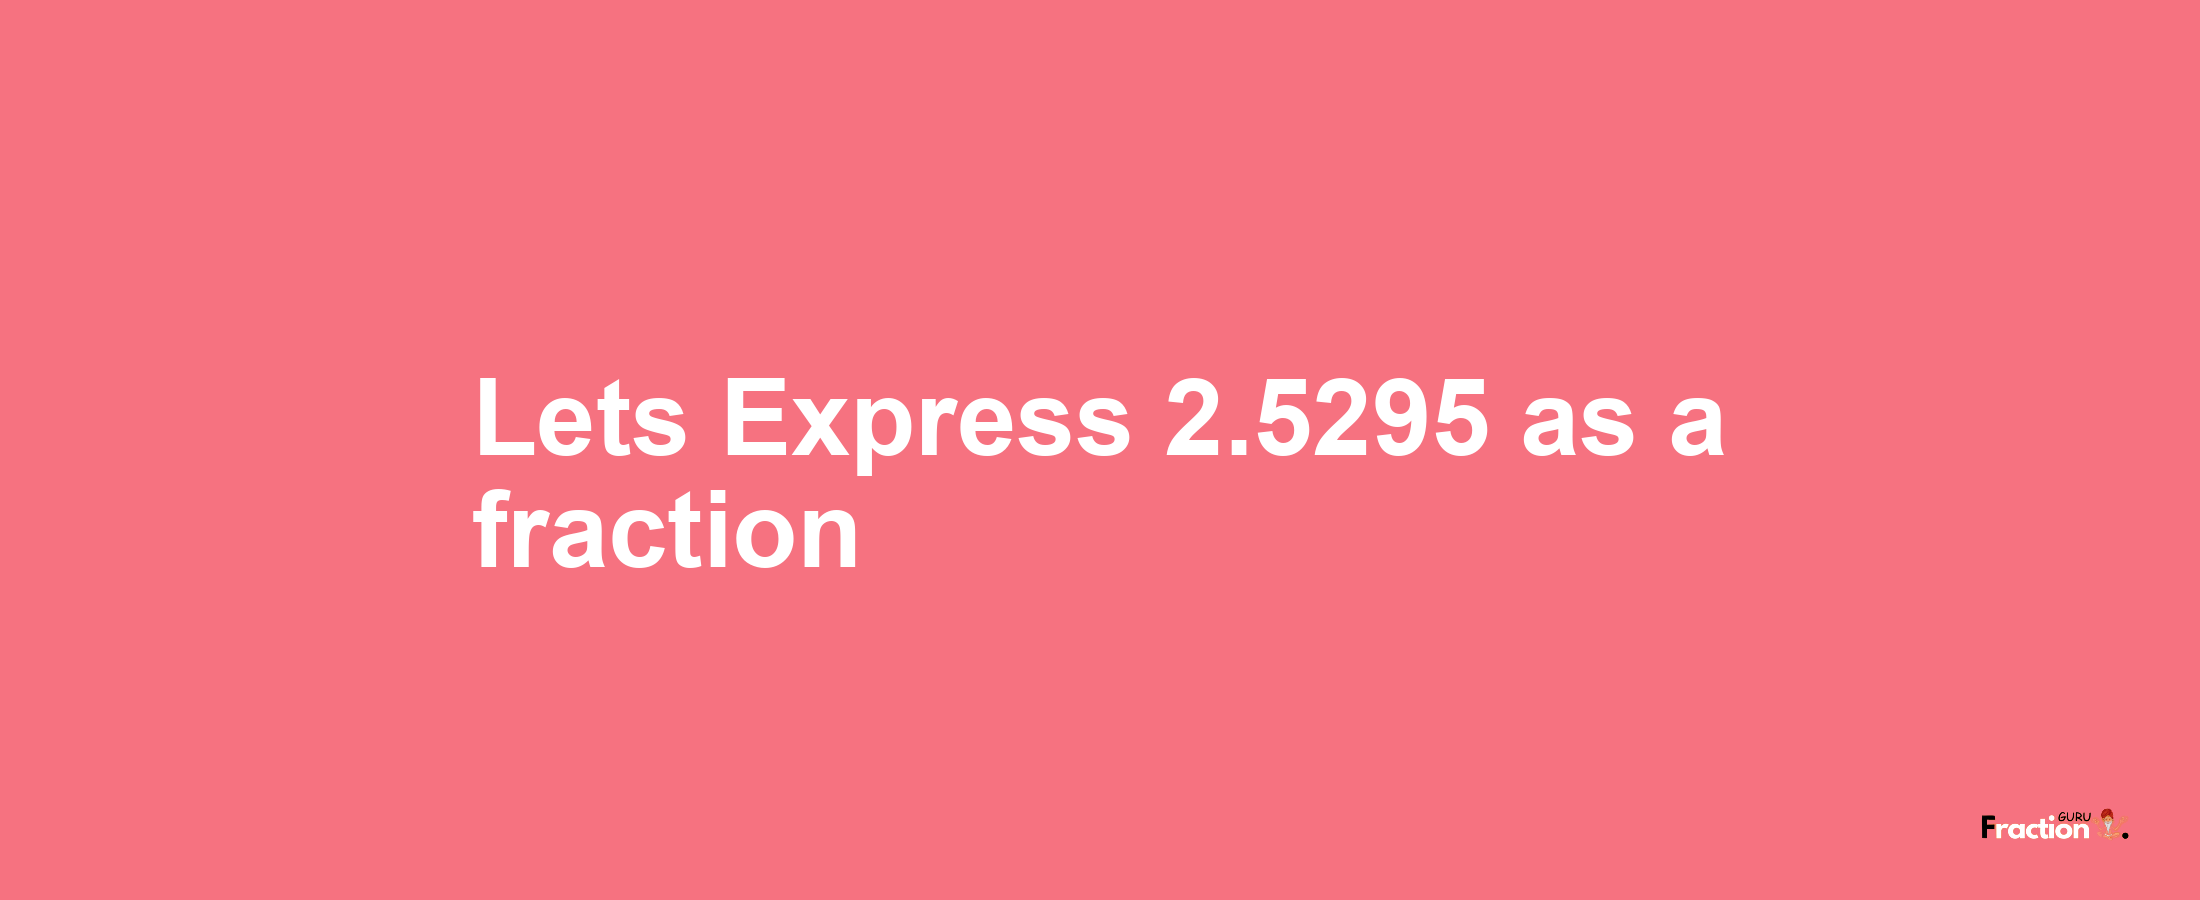 Lets Express 2.5295 as afraction